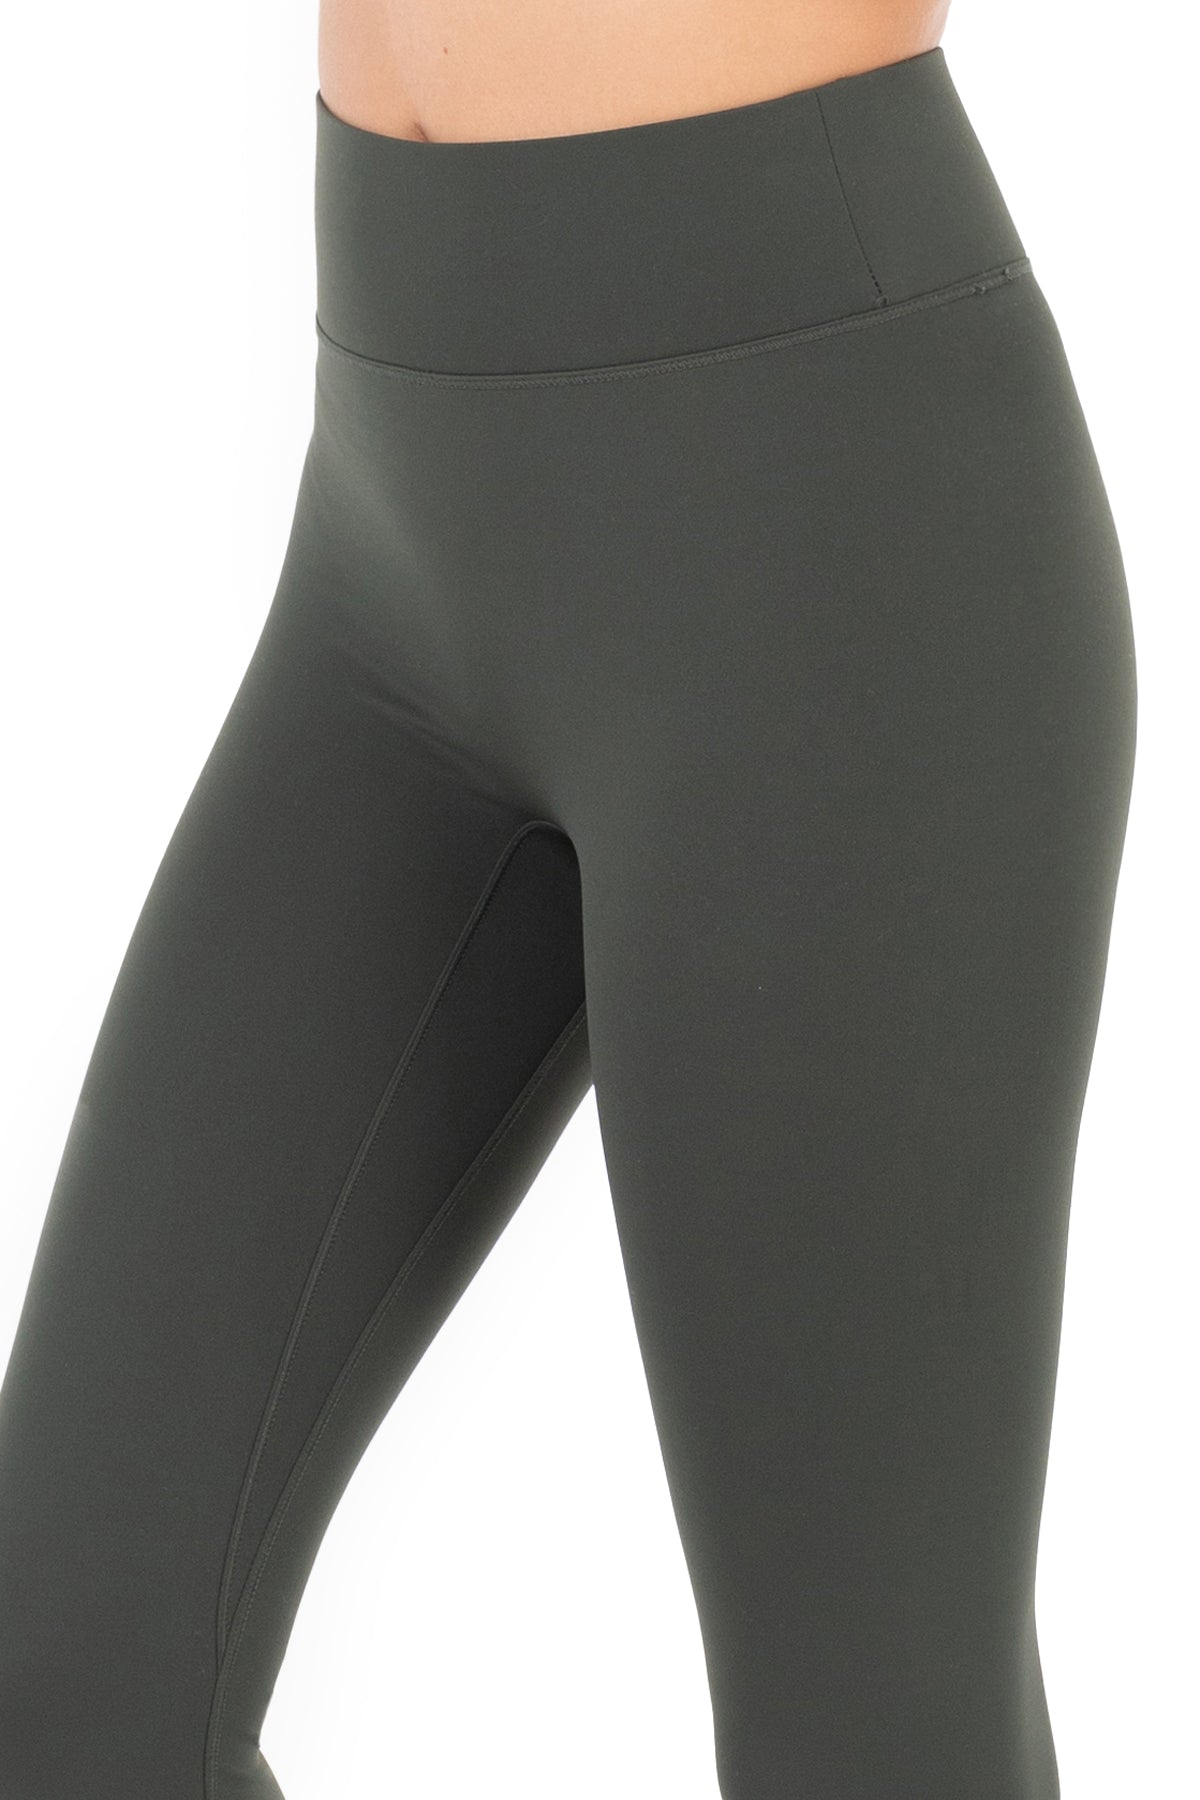 BENEUNDER Women's Leggings for Gym Workout Lounge High Waisted Buttery Soft  Yoga